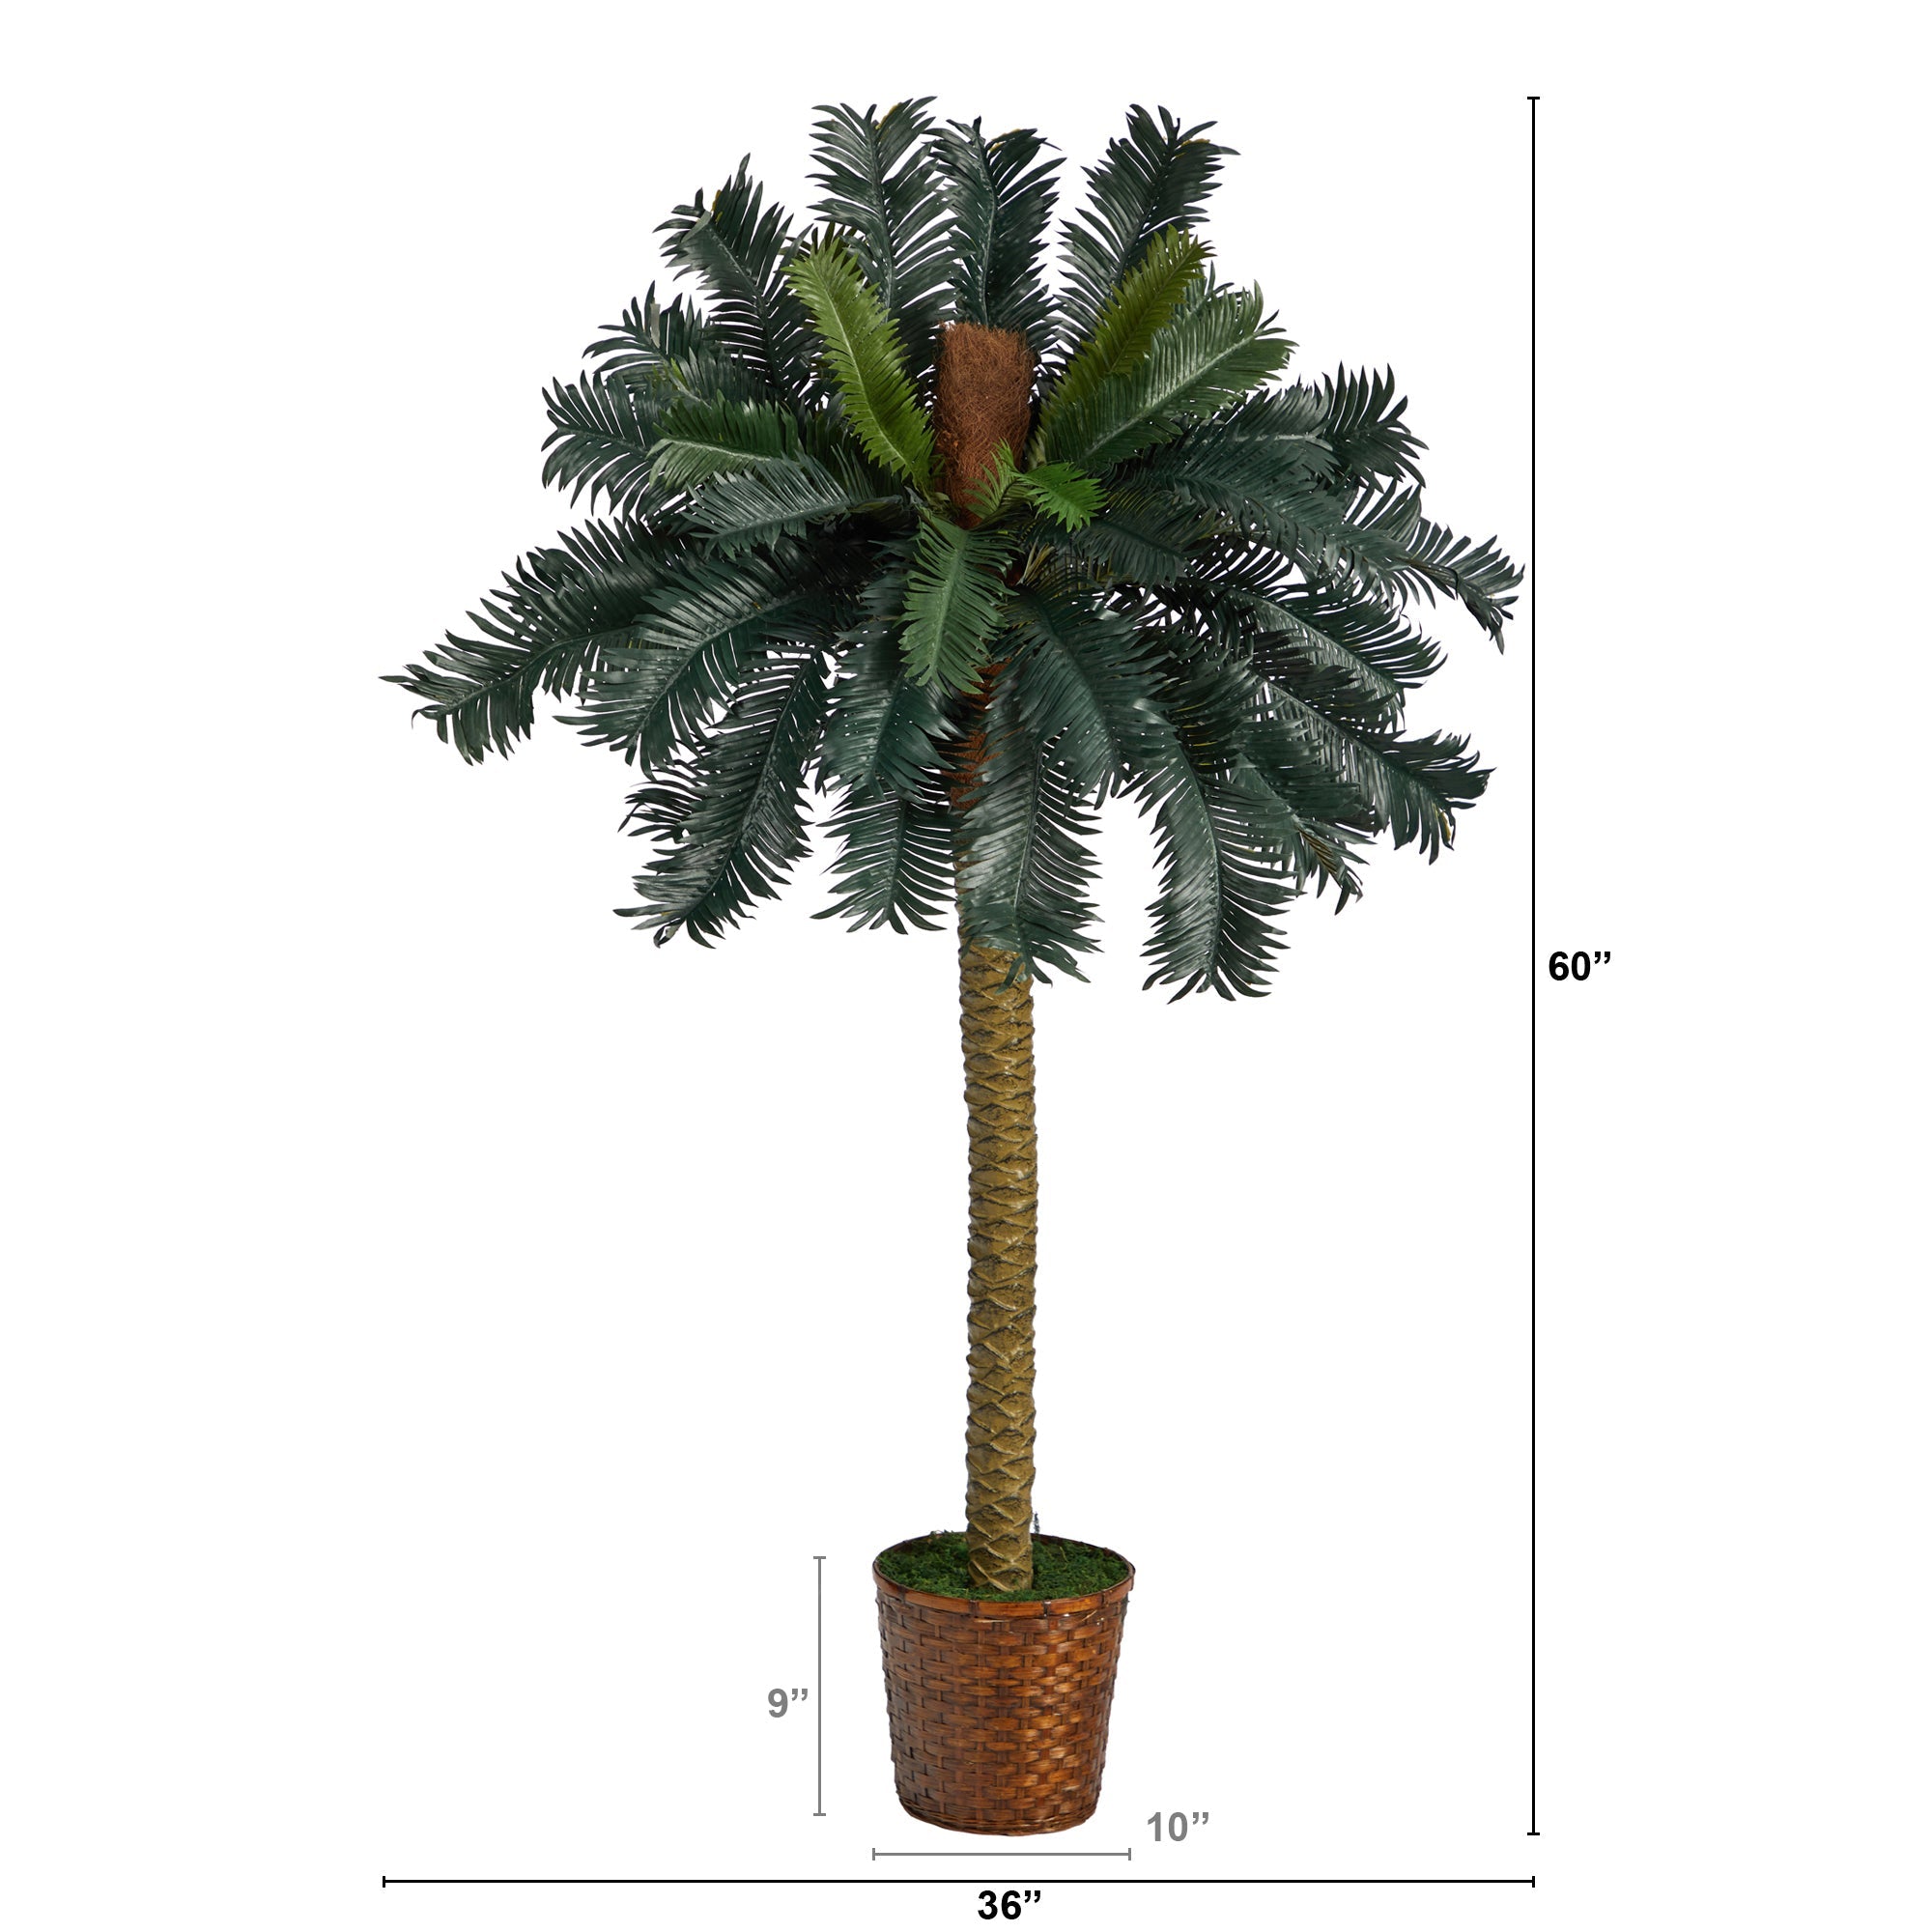 5' and 3' Double Sago Palm Artificial Tree with Basket